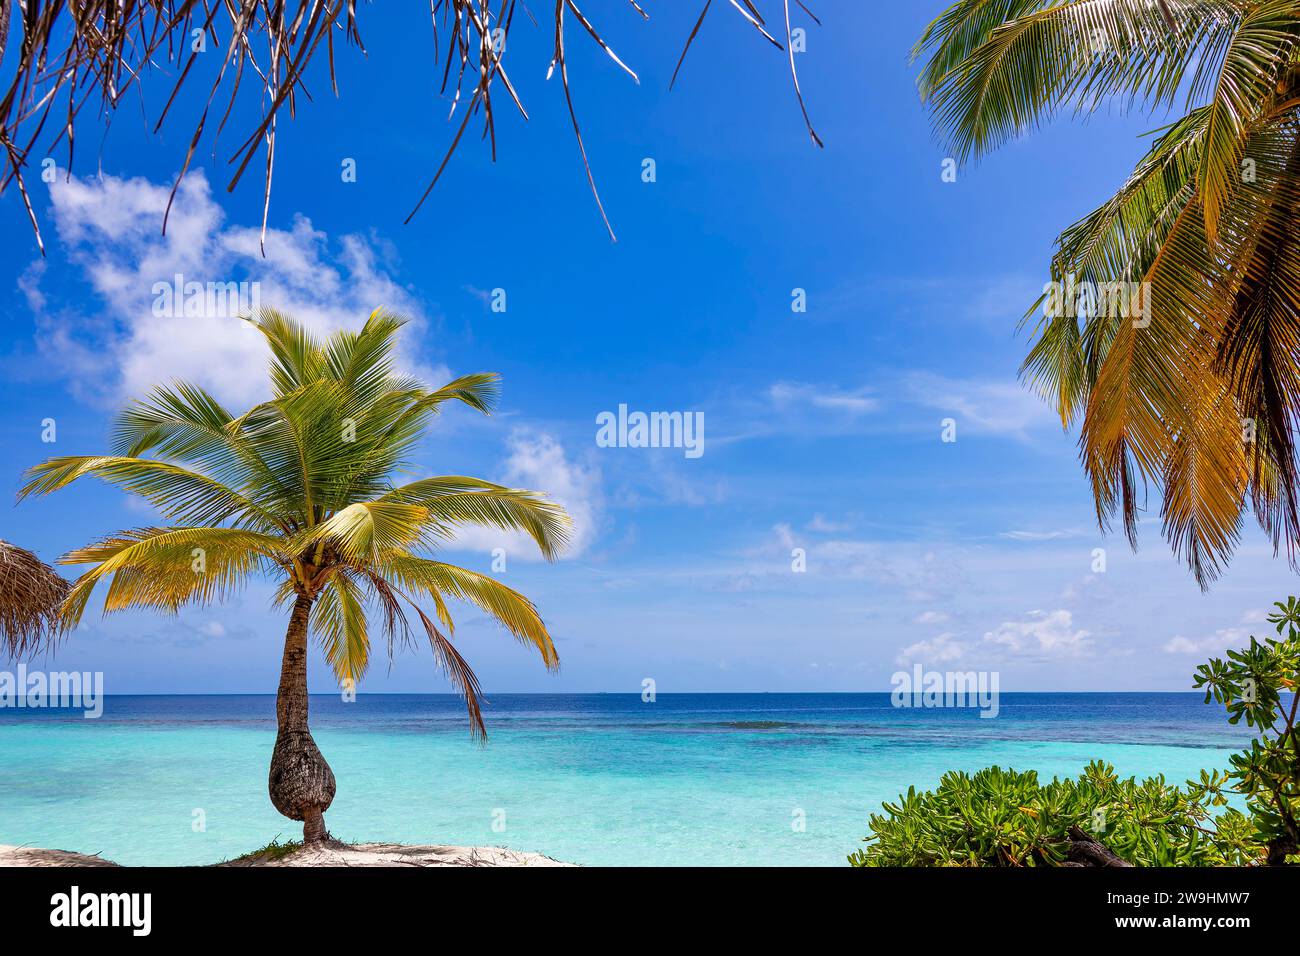 Tropical green vegeation with palm tree and bush on sandy beach of tropical island in front of turquoise ocean. Beautiful blue sky framing scenery Stock Photo